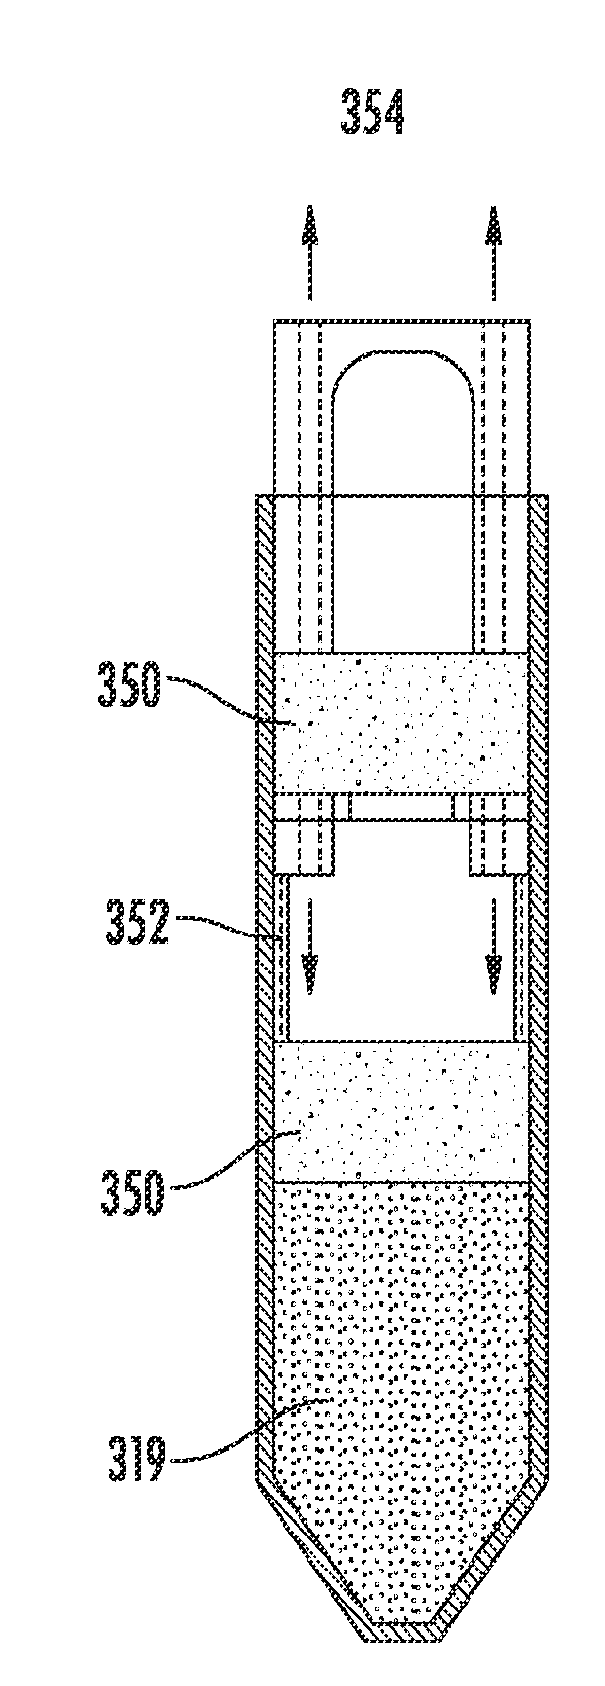 Devices and methods for overlaying blood or cellular suspensions